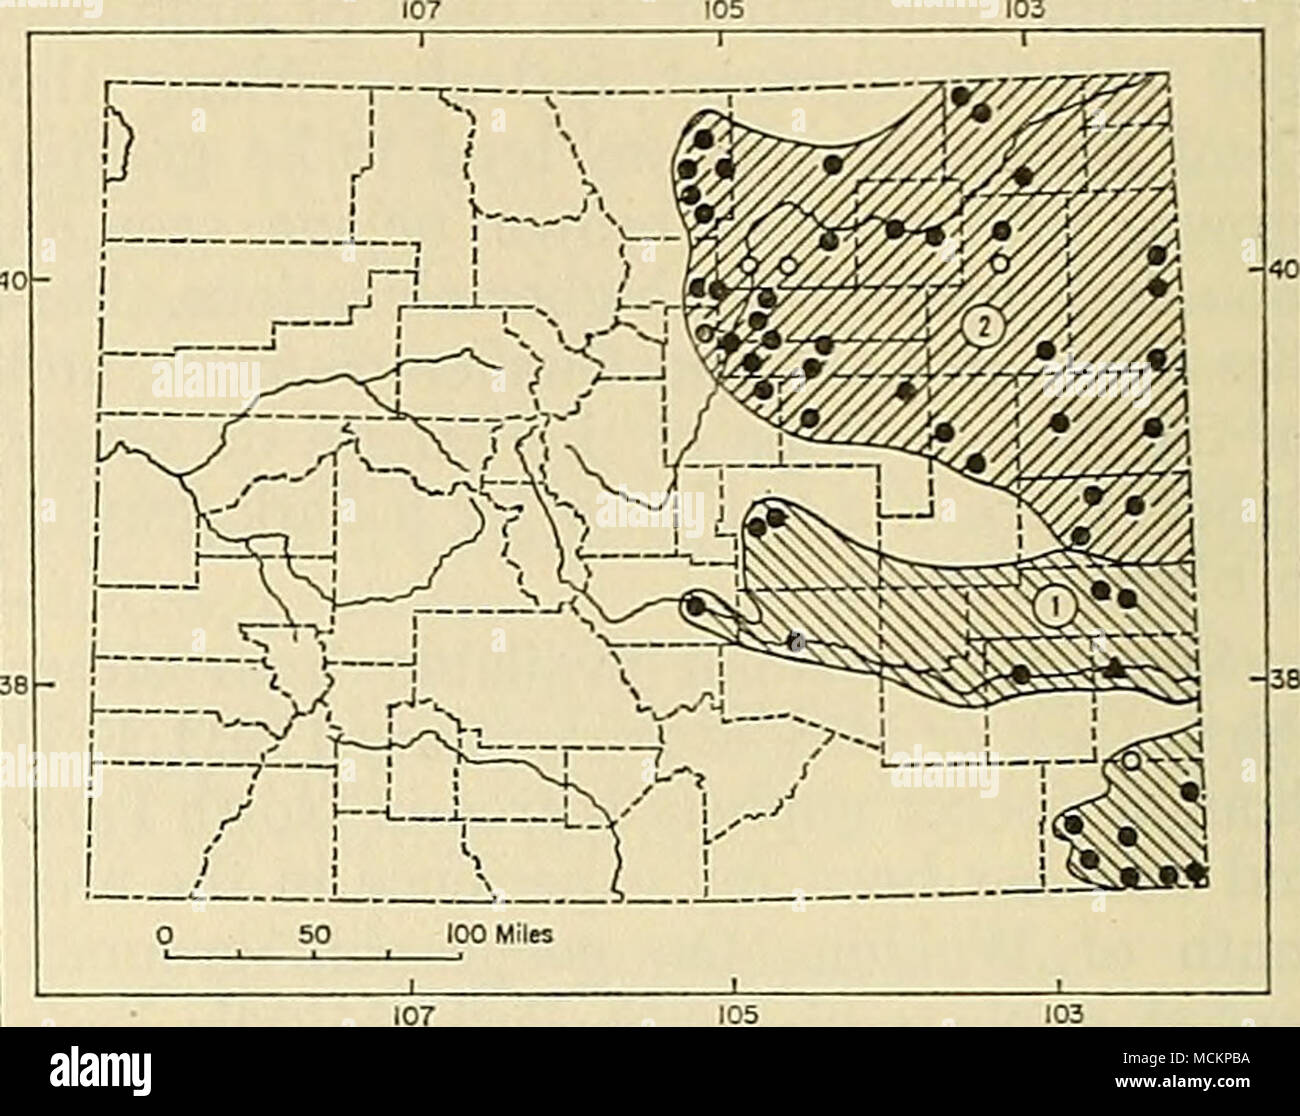 . Fig. 56. Distribution of Geomys bursarius in Colorado. 1. G. b. jugossicularis. 2. G. b. lutescens. For explanation of symbols, see p. 9. Raca County are: 255, 243, 255; 87, 82, 83; 31, 32, 32; weights, 215, 178, 175. External meas- urements of two males, and mean (and ex- tremes) of five females, all from east-central Fremont County, are: 269, 303, 254.6 (249- 267); 80, 93, 81.6 (75-90); 32, 36, 32.8 (31- 35). Selected cranial measurements are pre- sented in table 15. Remarks.—Externally, Coloradan speci- mens of G. b. lutescens and G. b. jugossicularis are practically indistinguishable, al Stock Photo